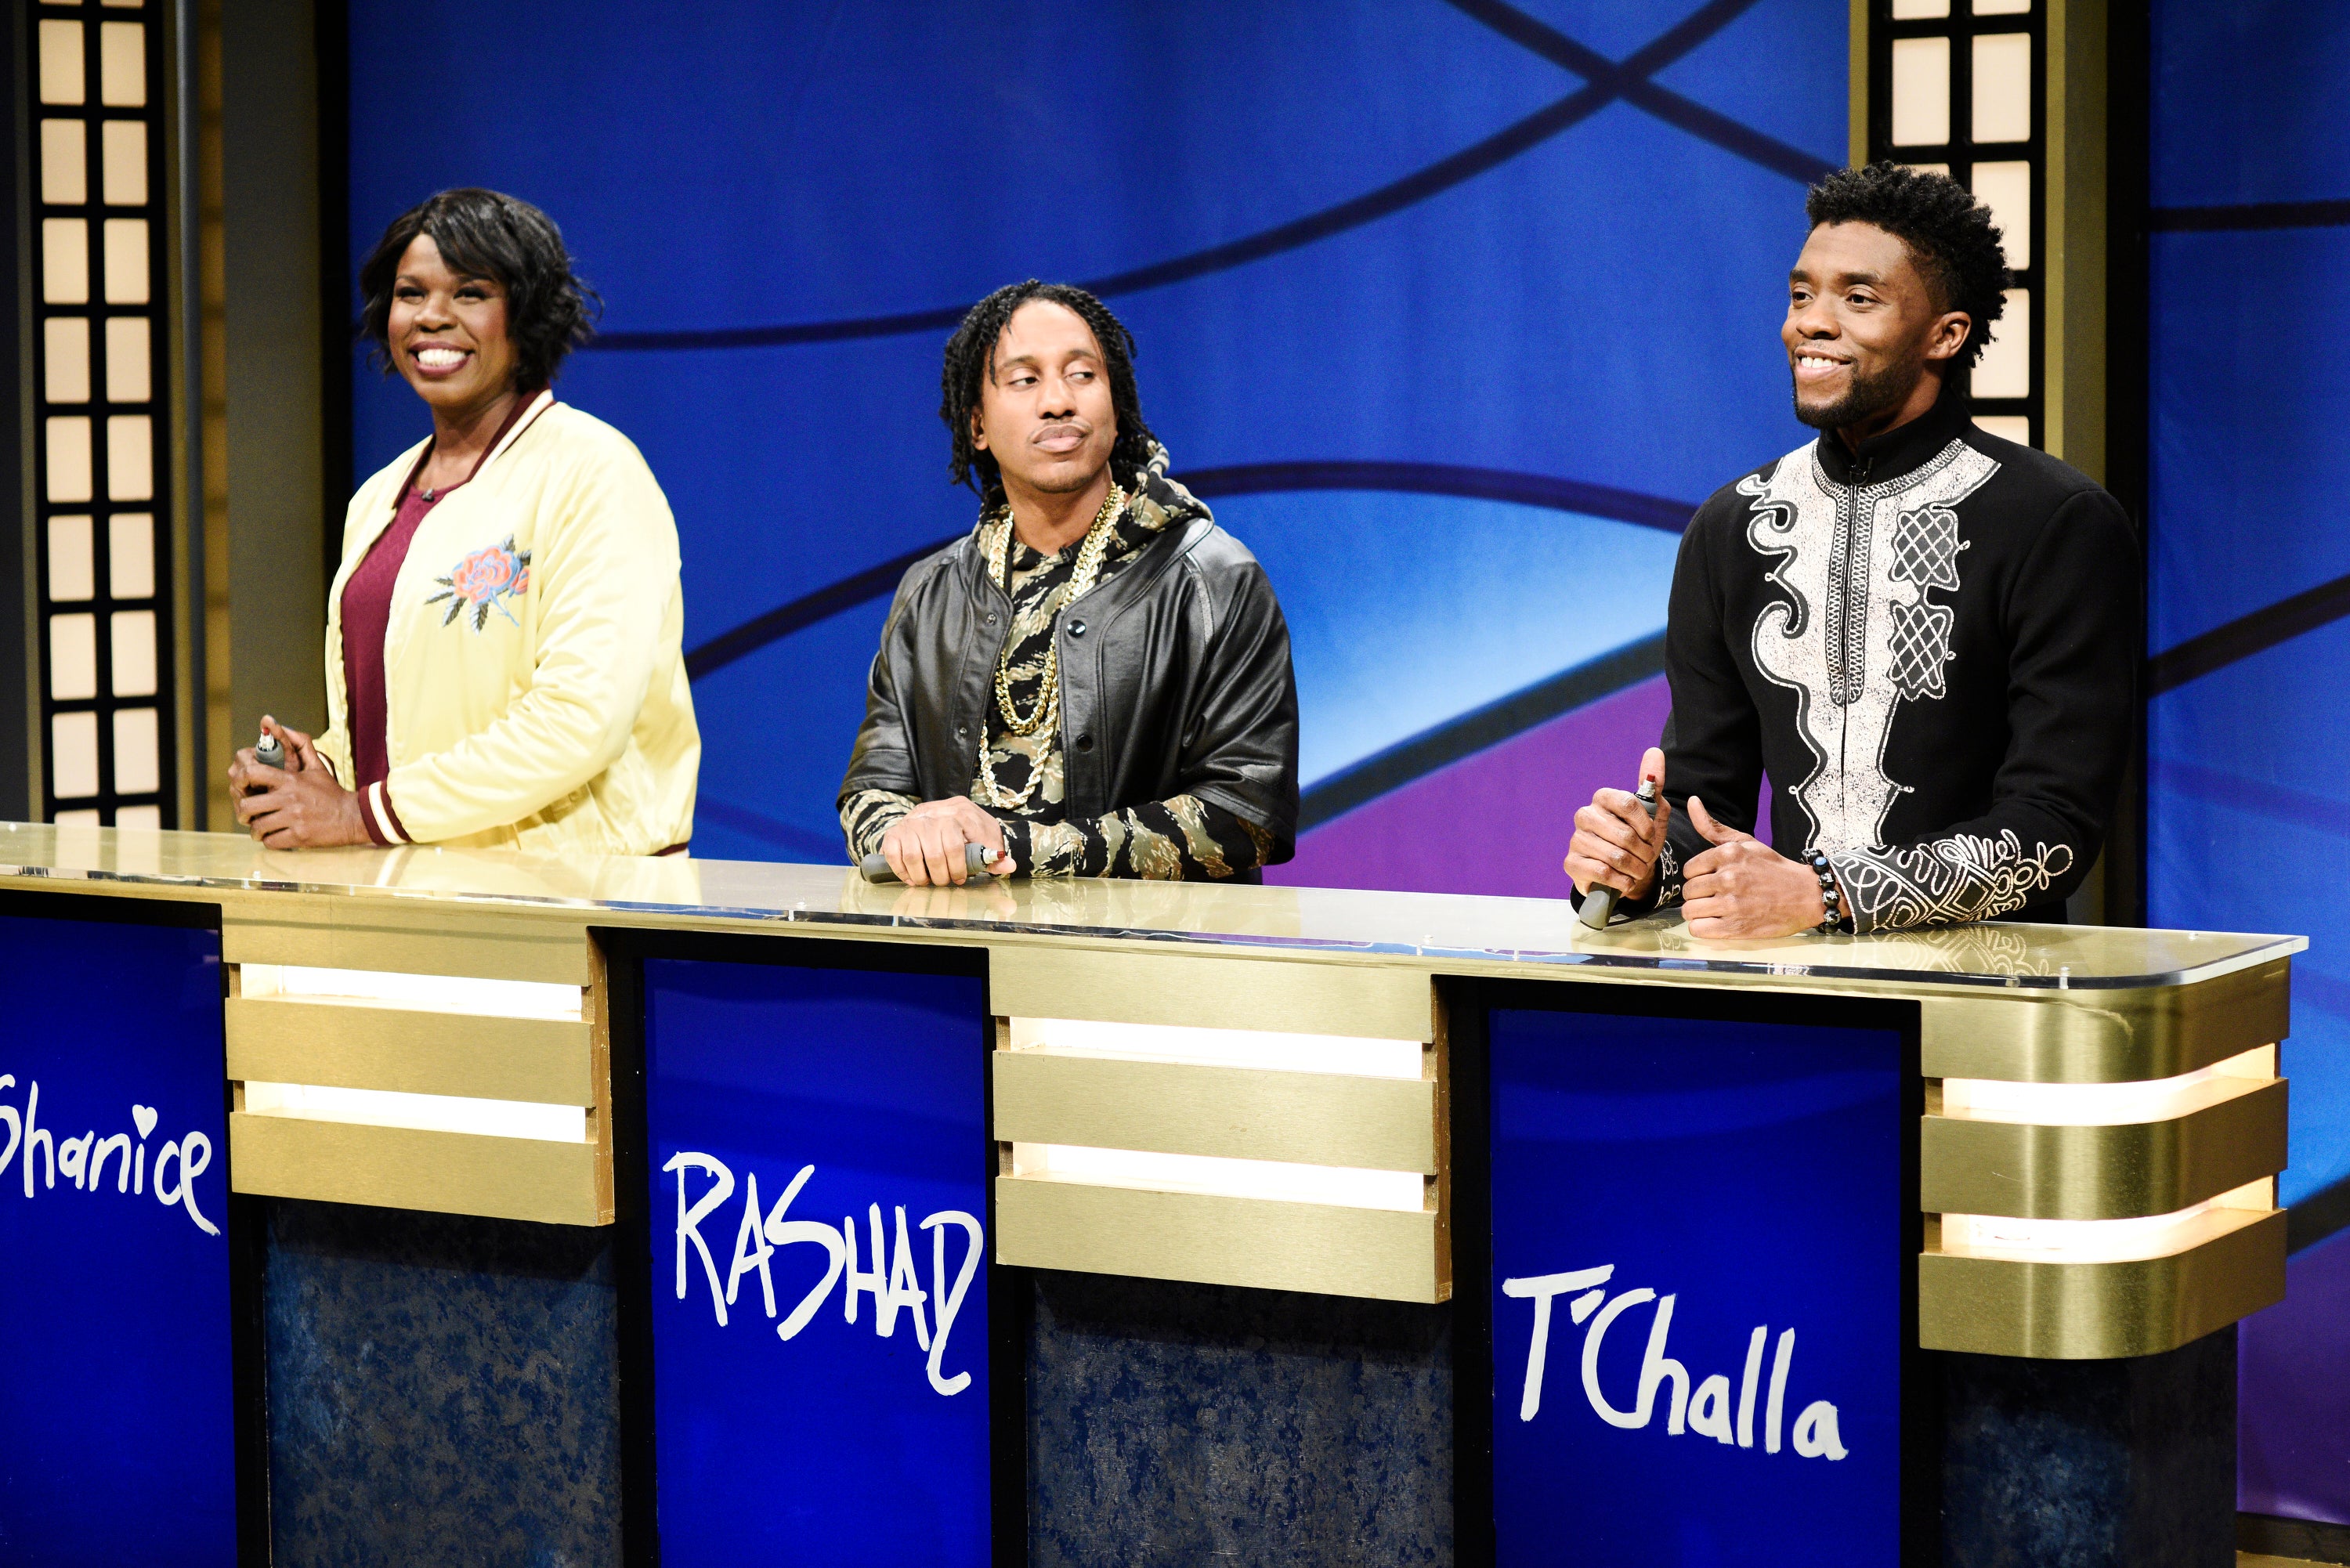 T'Challa Hilariously Struggles With 'Black Jeopardy' As Chadwick Boseman Makes SNL Debut
